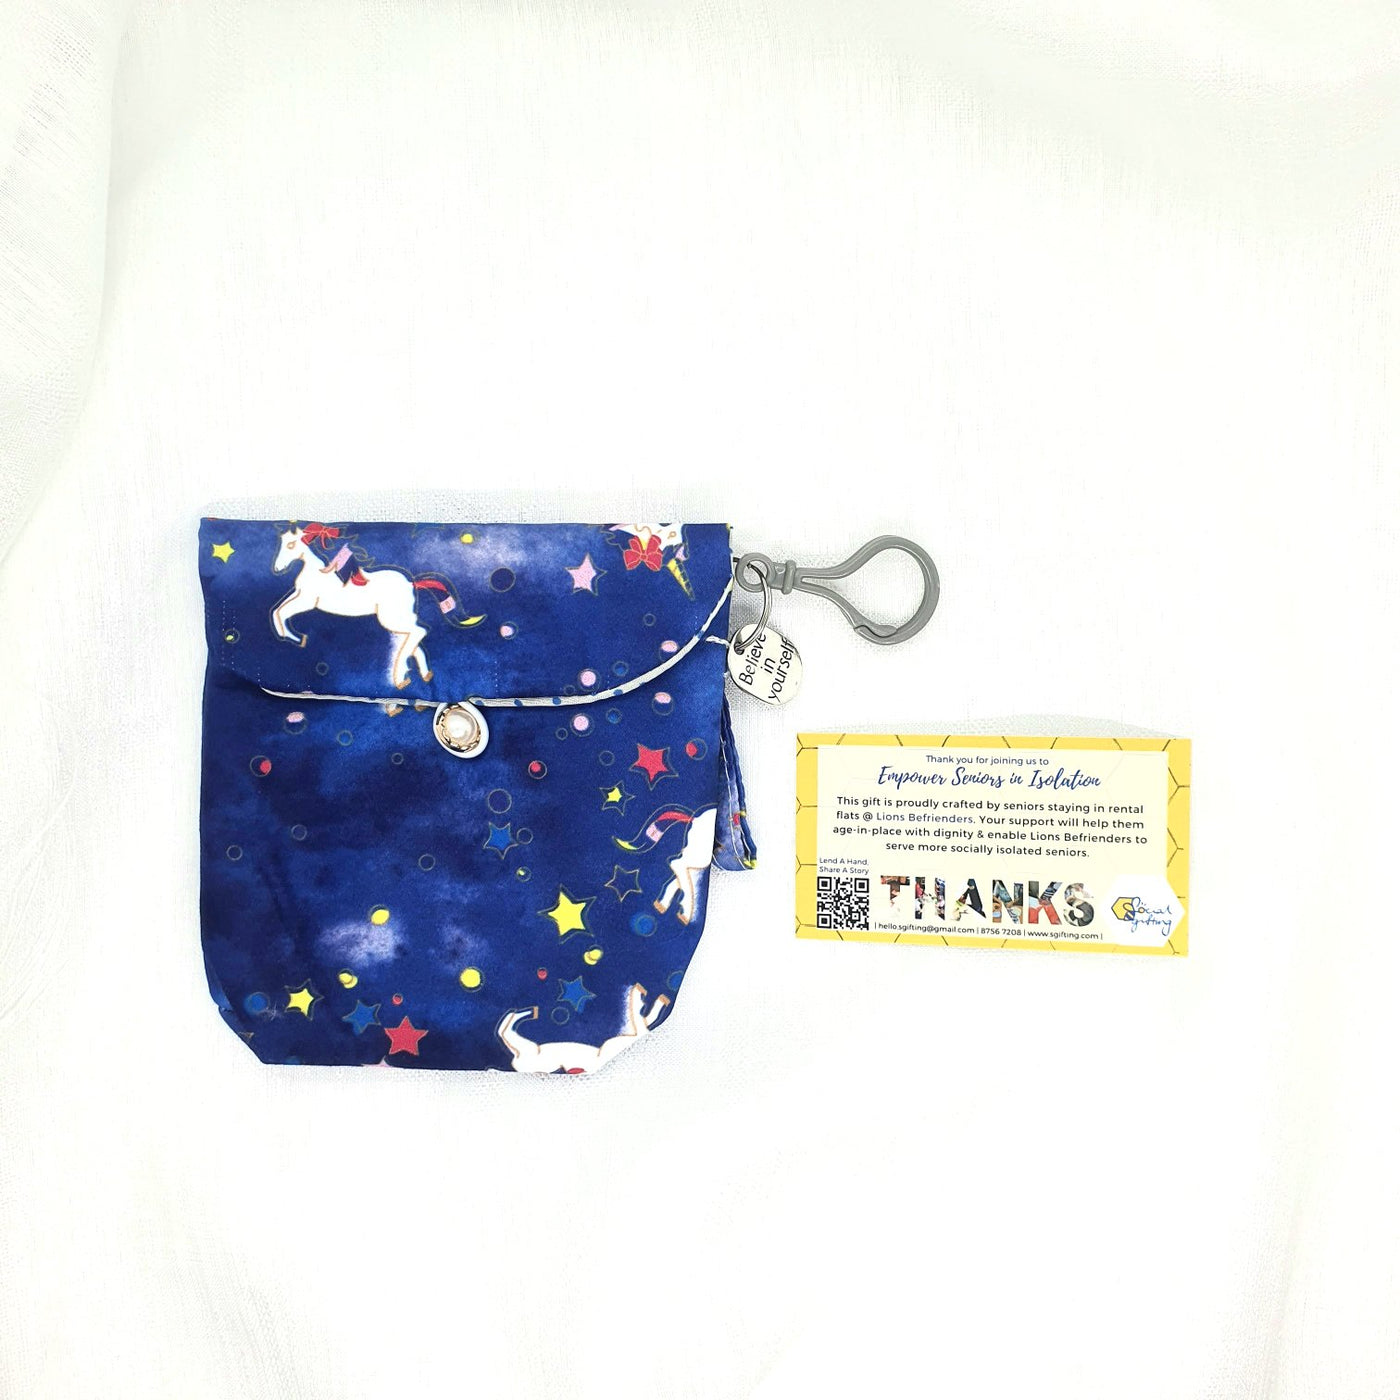 Multi-purpose Pouch with Motivational Charm